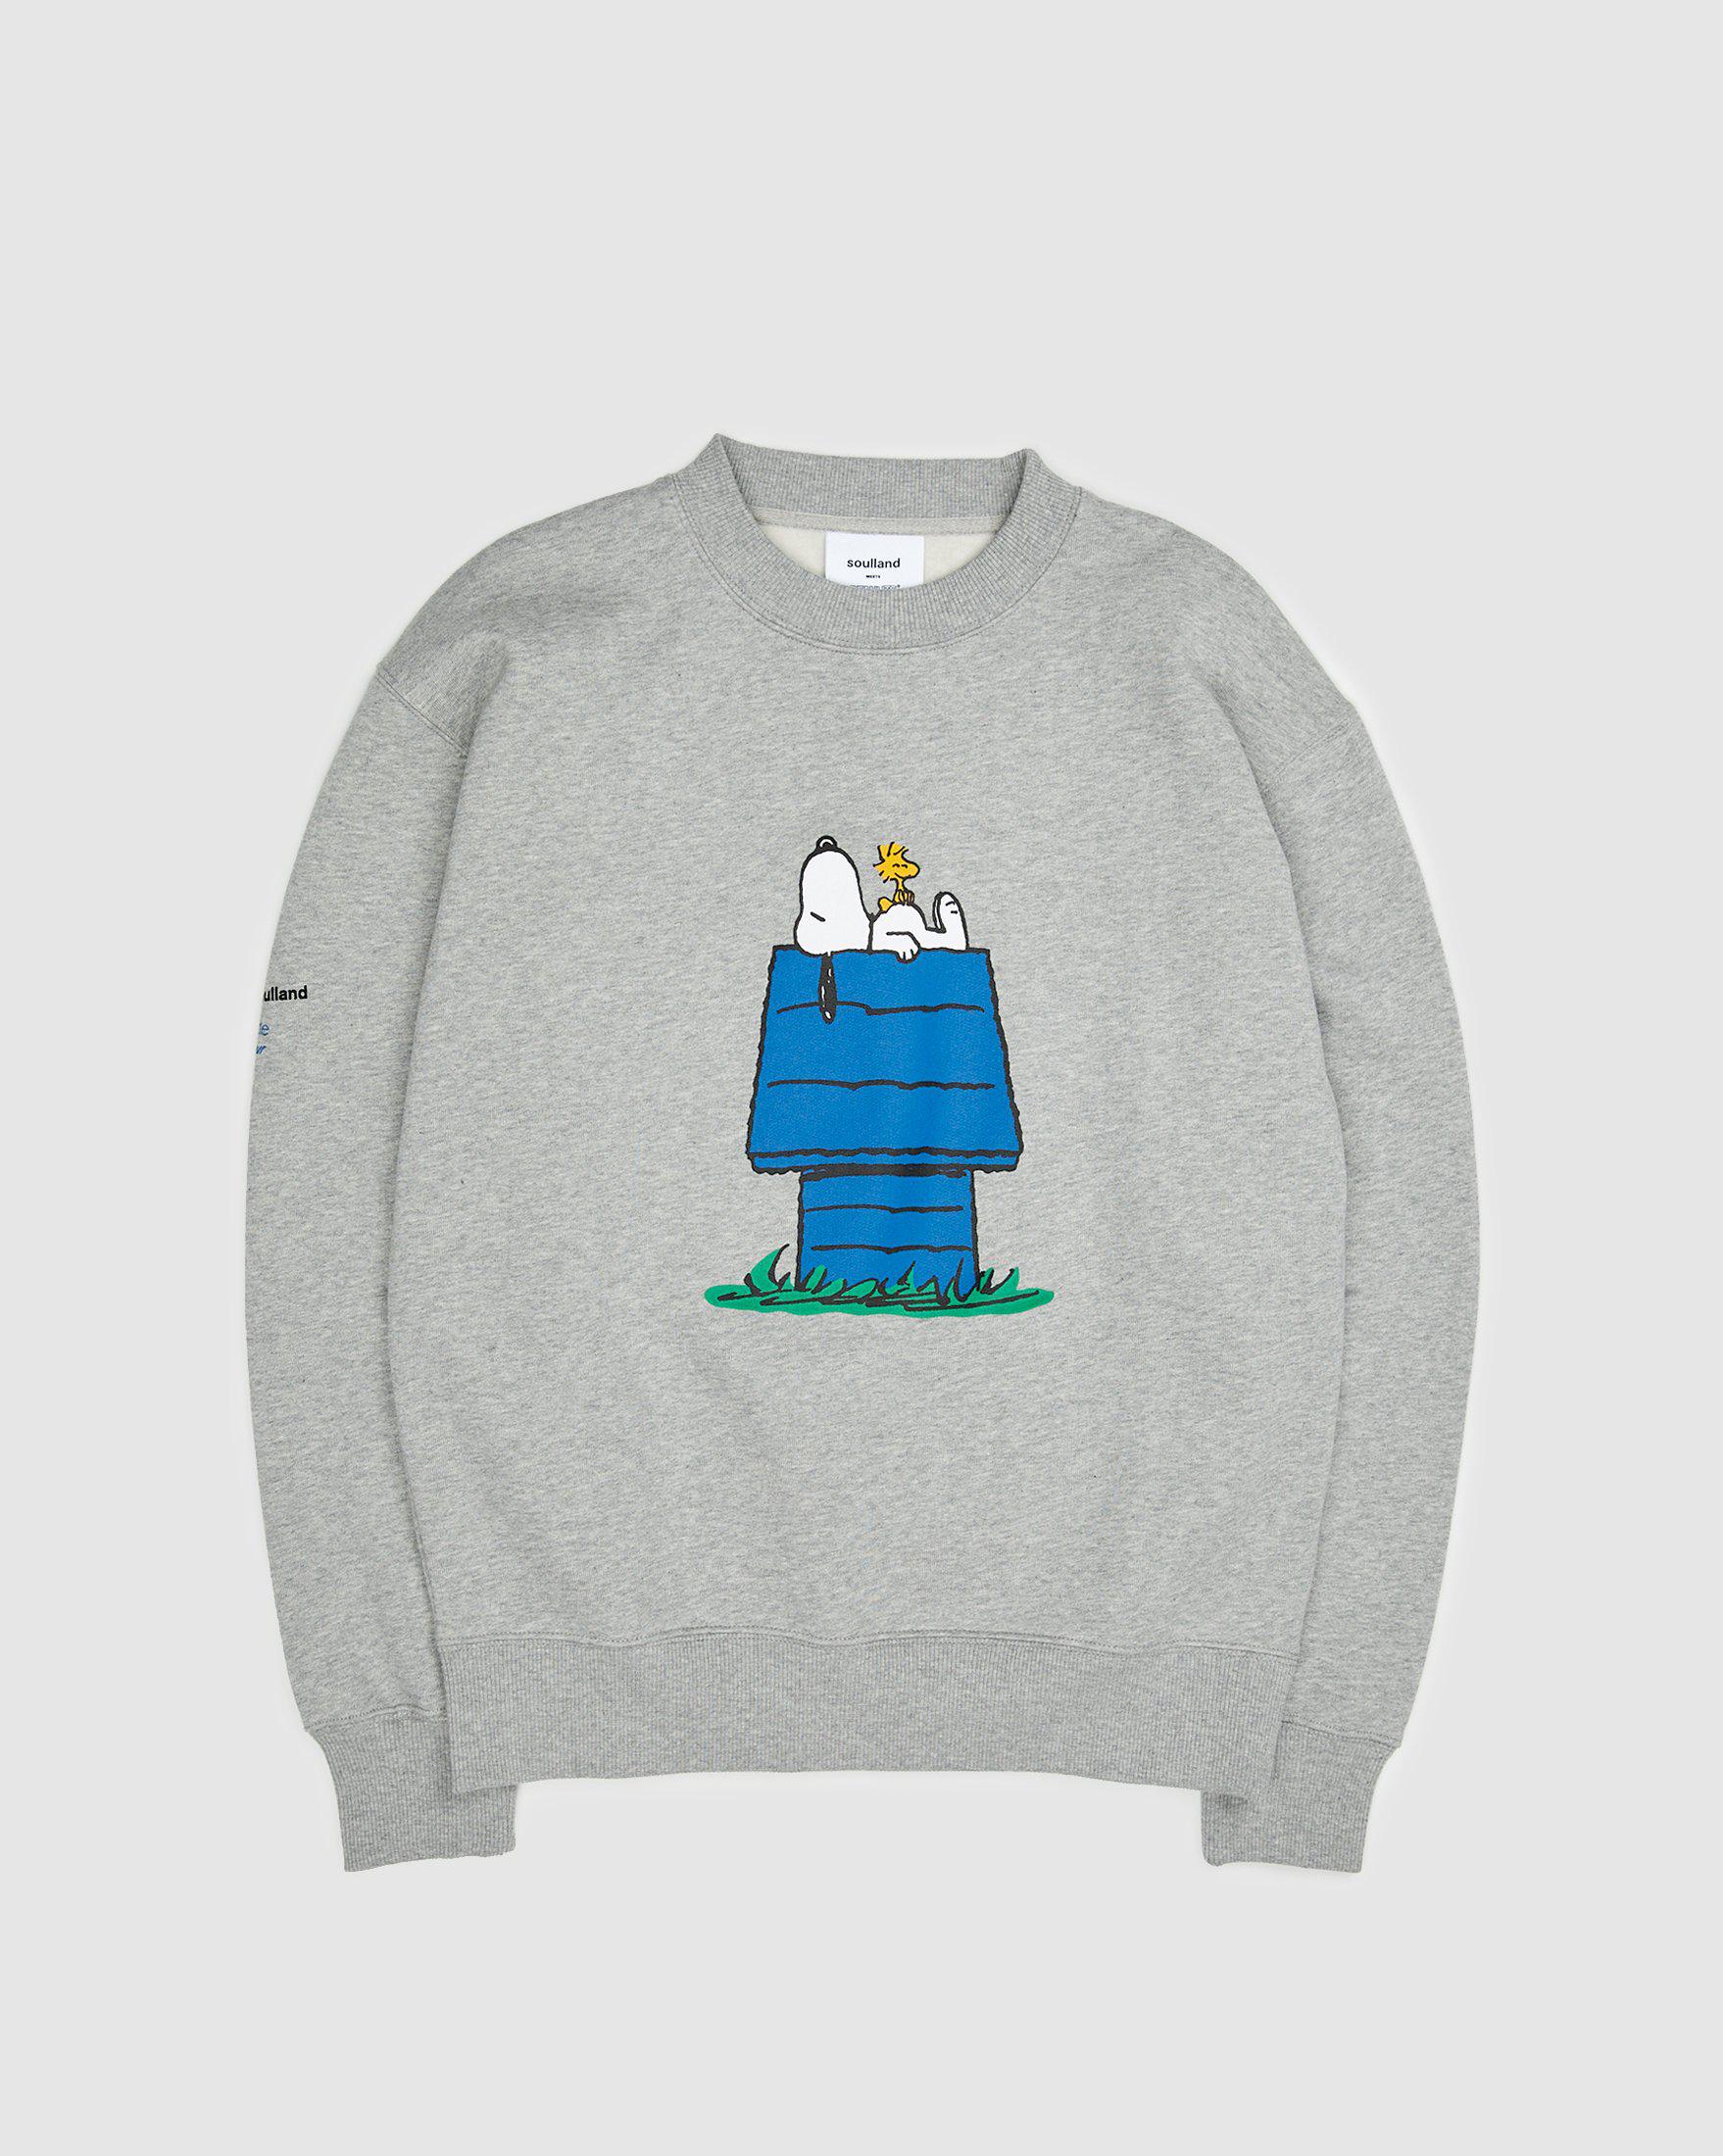 Colette Mon Amour x Soulland – Snoopy Bed Grey Crewneck by COLETTE MON AMOUR X SOULLAND